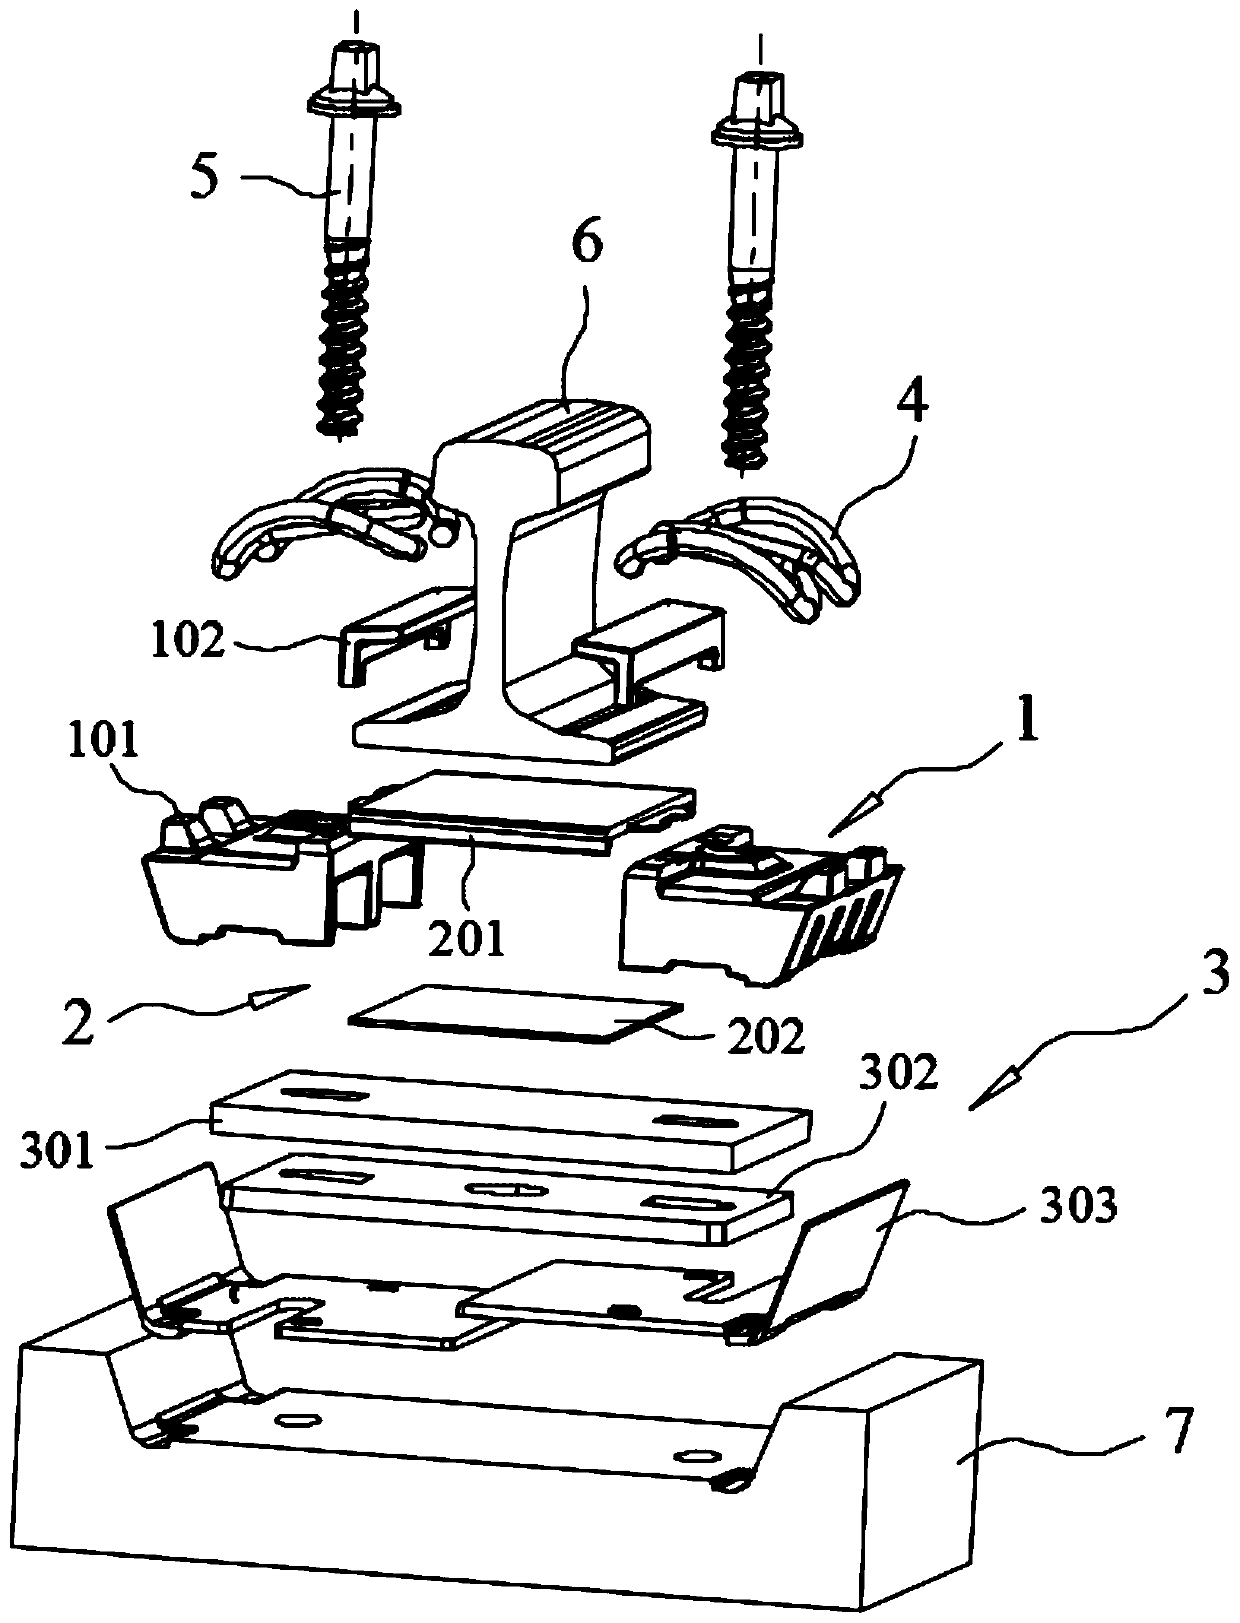 Rail height adjusting method suitable for rail with baffle parts